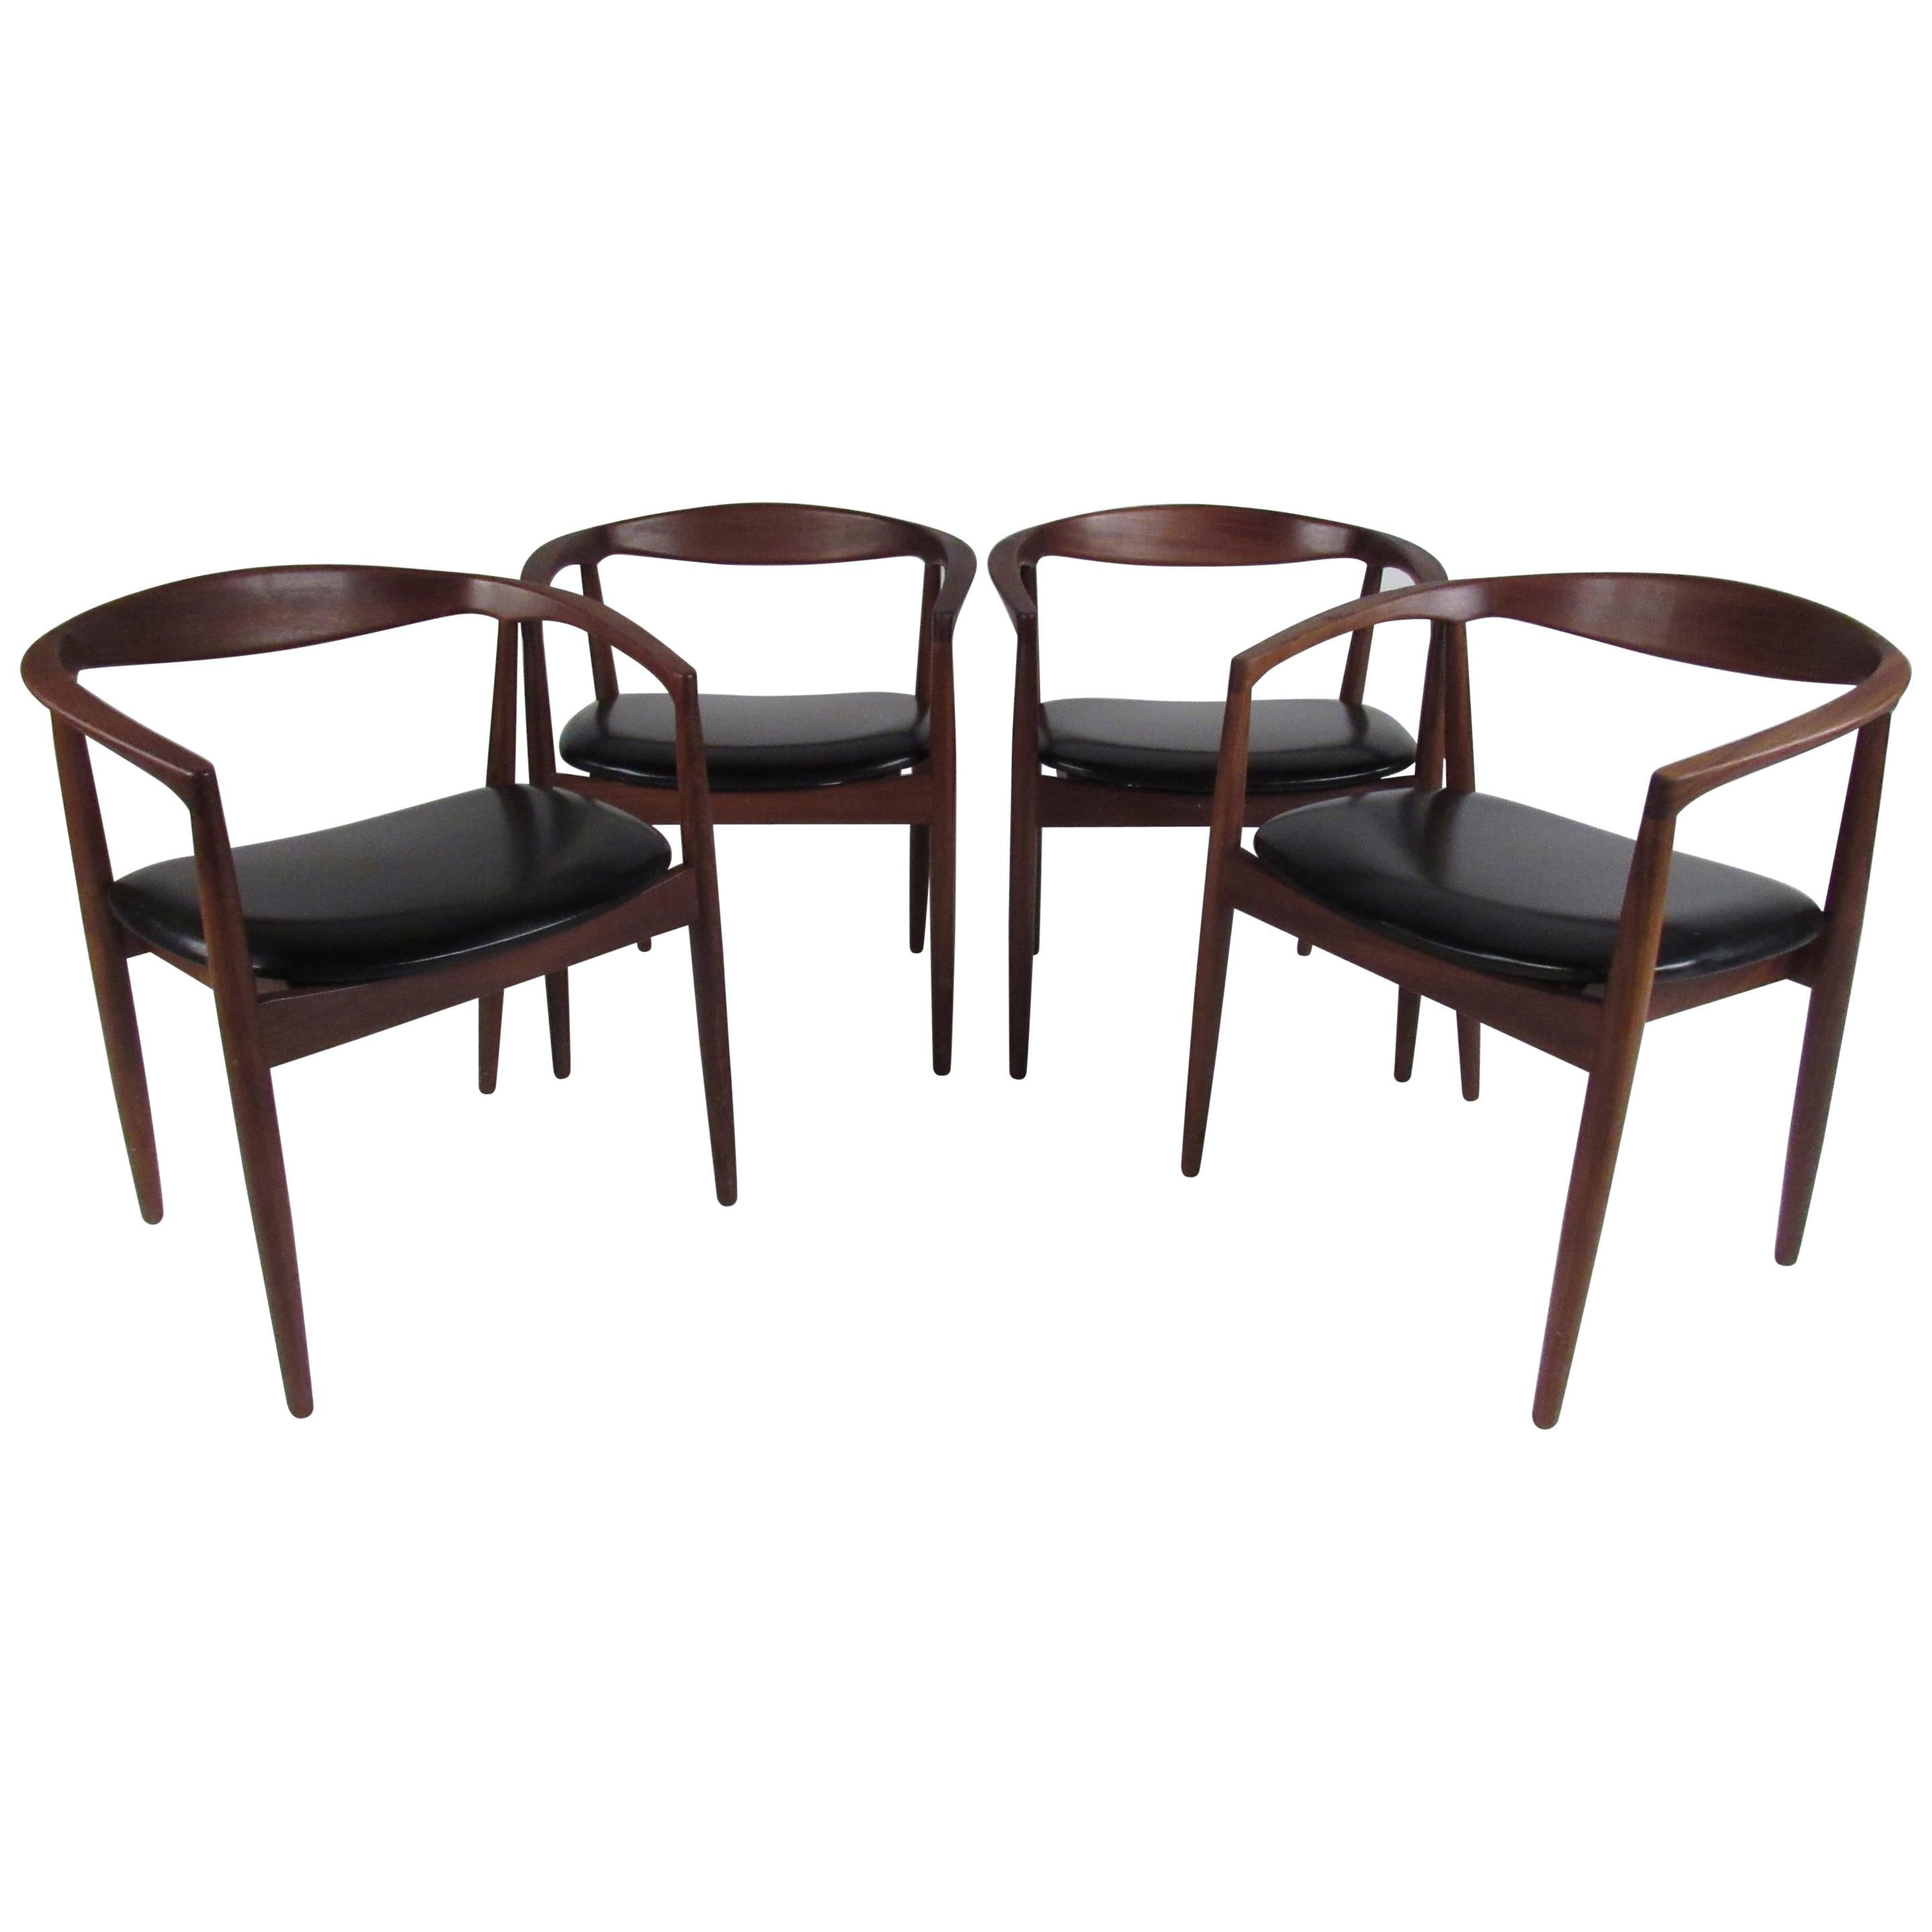 Set of Four Danish Modern Dining Chairs